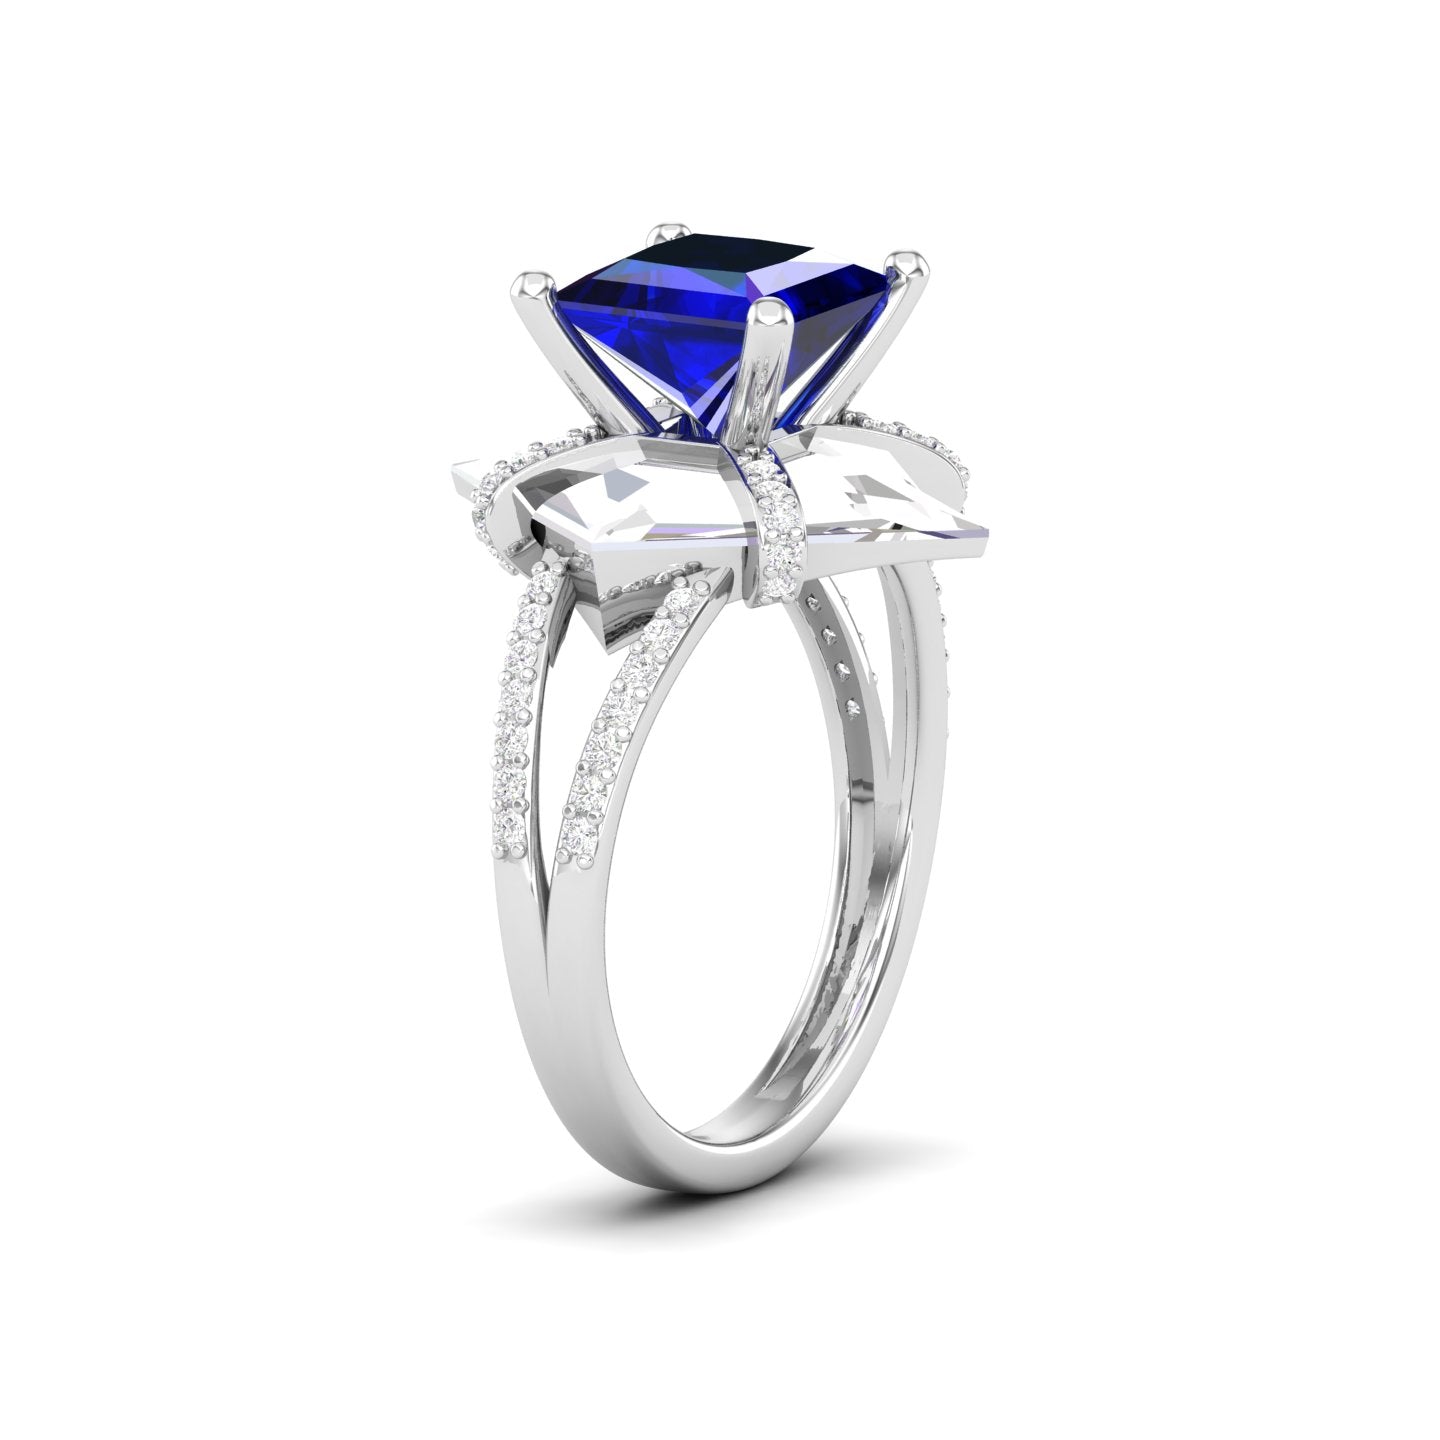 Maurya Color in Water Blue Sapphire Split Shank Engagement Ring with Diamonds